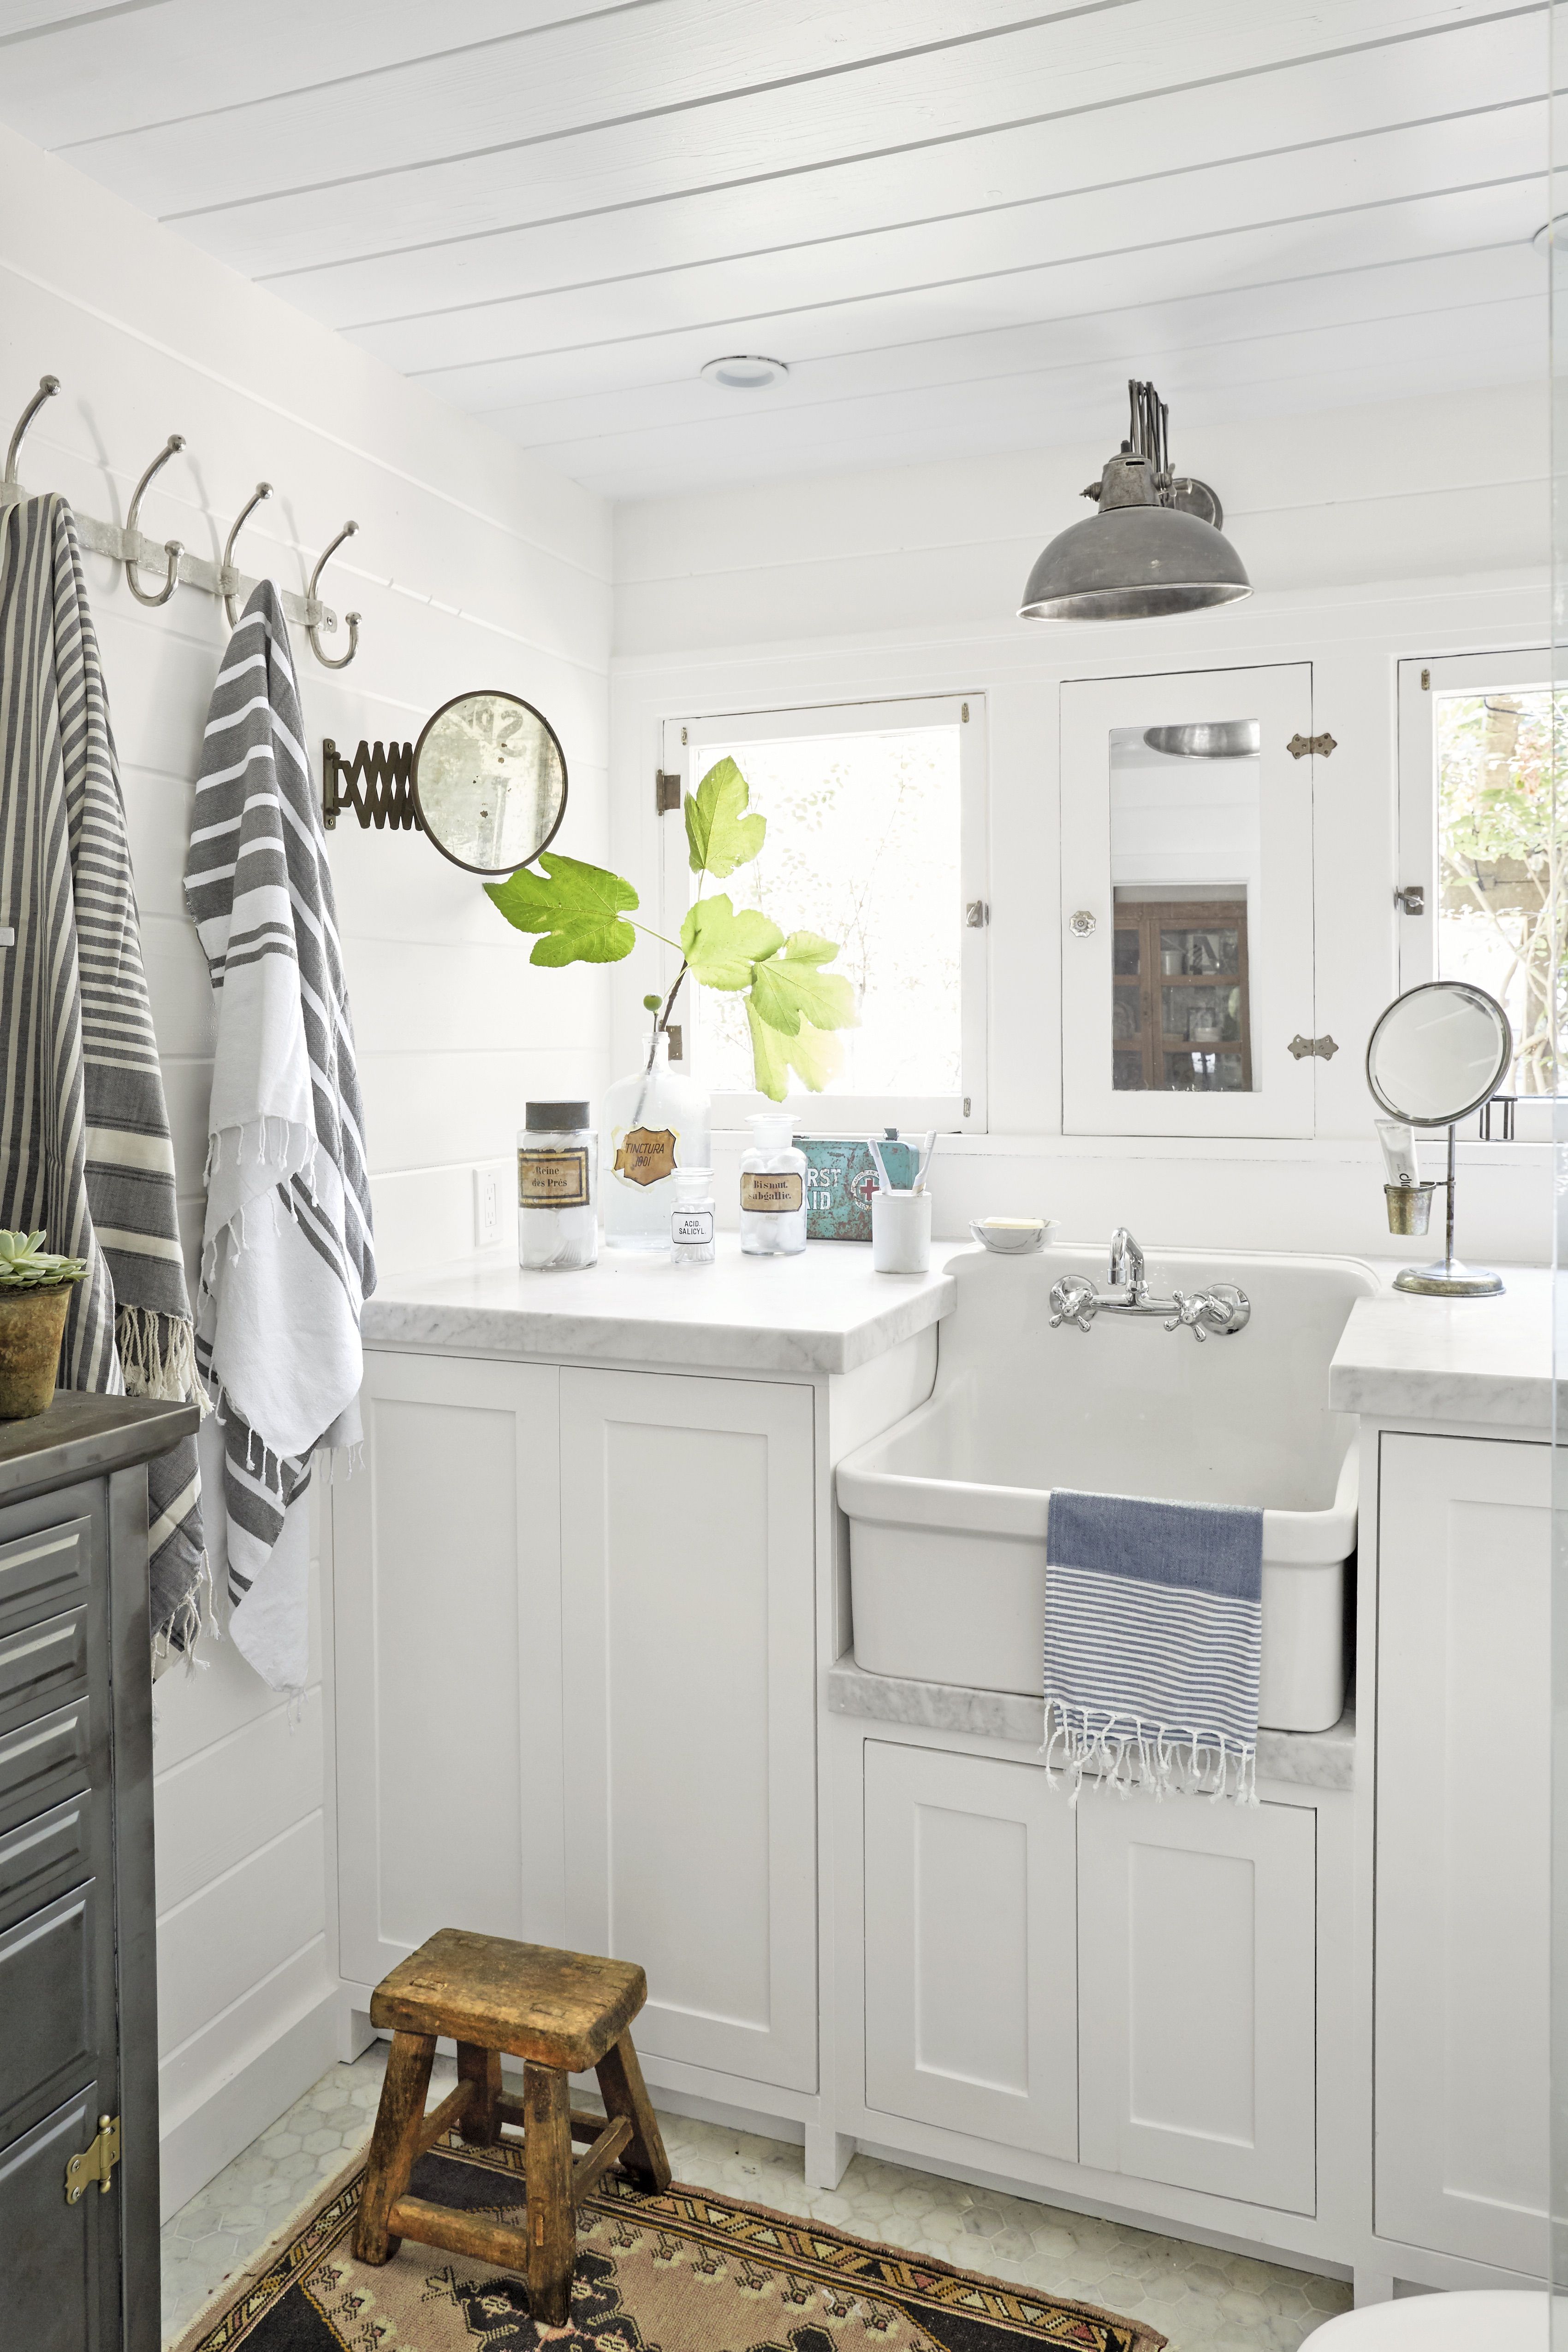 25 Bathroom Storage Ideas Best Small, Bathroom Cupboards For Small Spaces